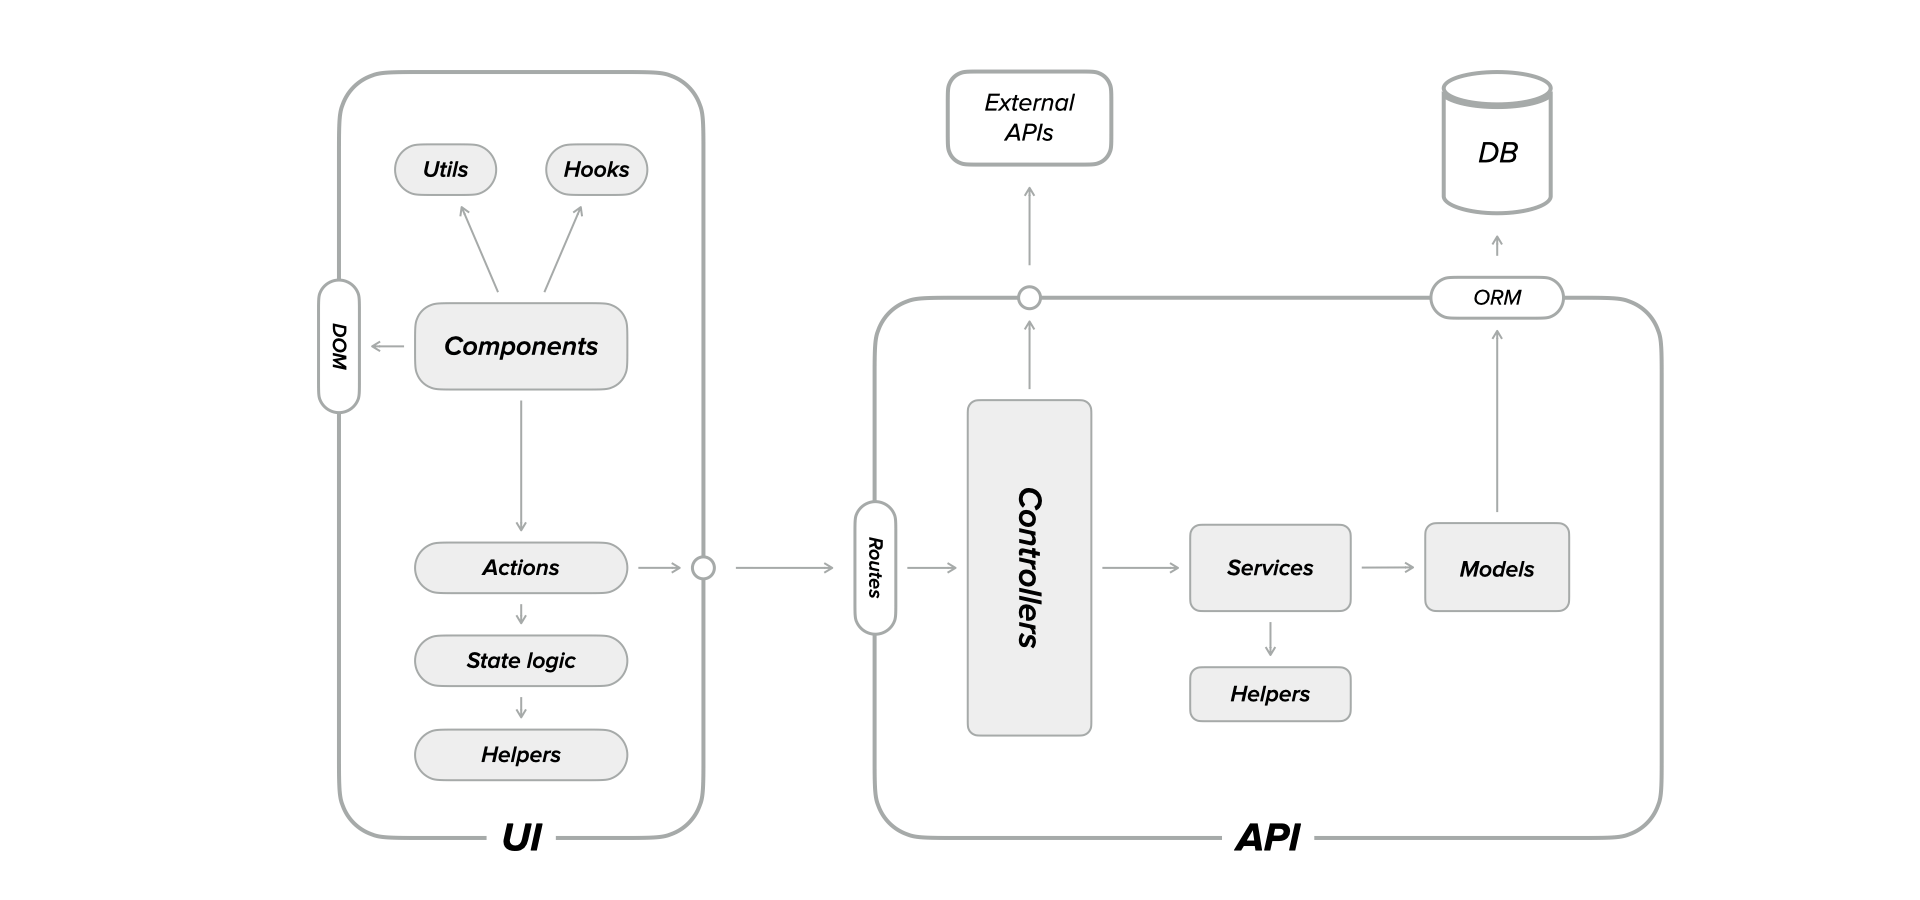 A more detalied, but not comprehensive architecture diagram, depicting a User Interface components consuming custom hooks, utils, and DOM Apis, dispatching actions, which trigger state logic for updates using various helpers. The actions also call APIs endpoints, hitting the API routes, which call the controllers, which use services, which in turn use various helpers as well but also query the database through the ORM models. Lastly, the controllers also might call external APIs.